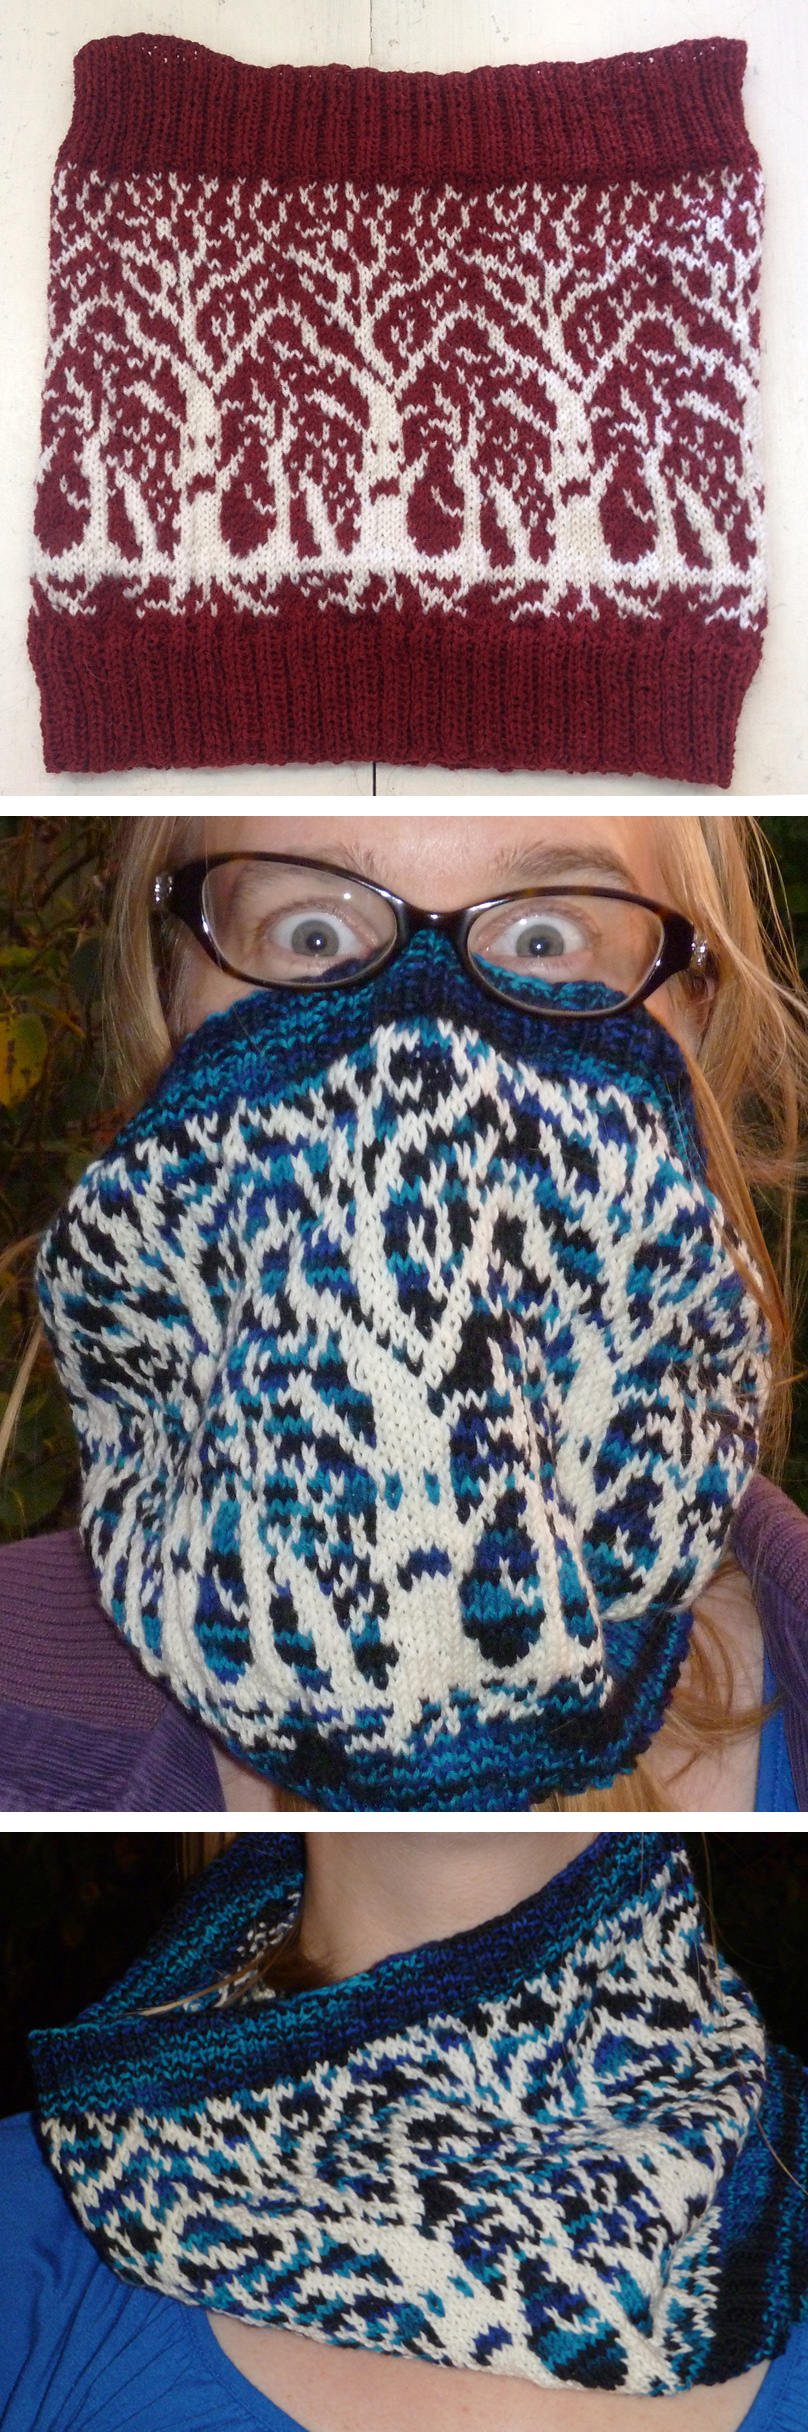 Free Knitting Pattern for Weirwood Cowl